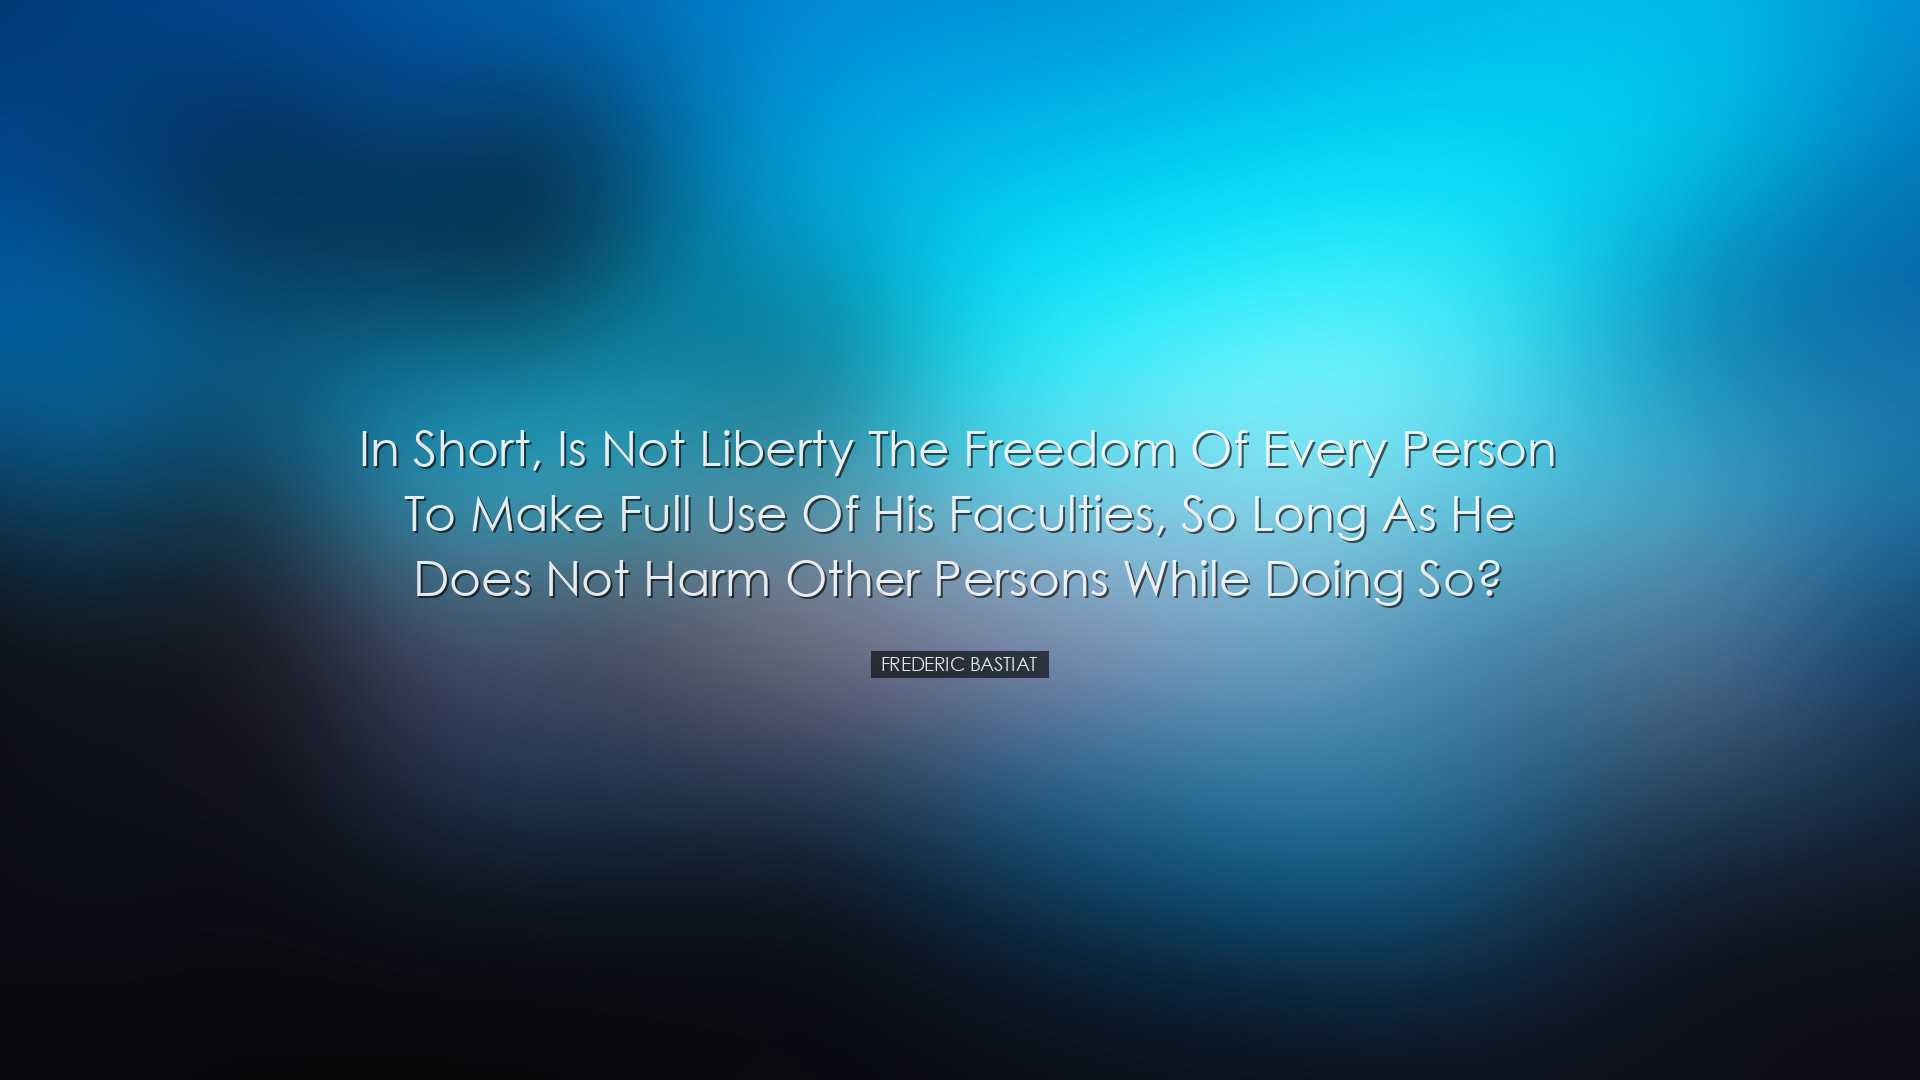 In short, is not liberty the freedom of every person to make full